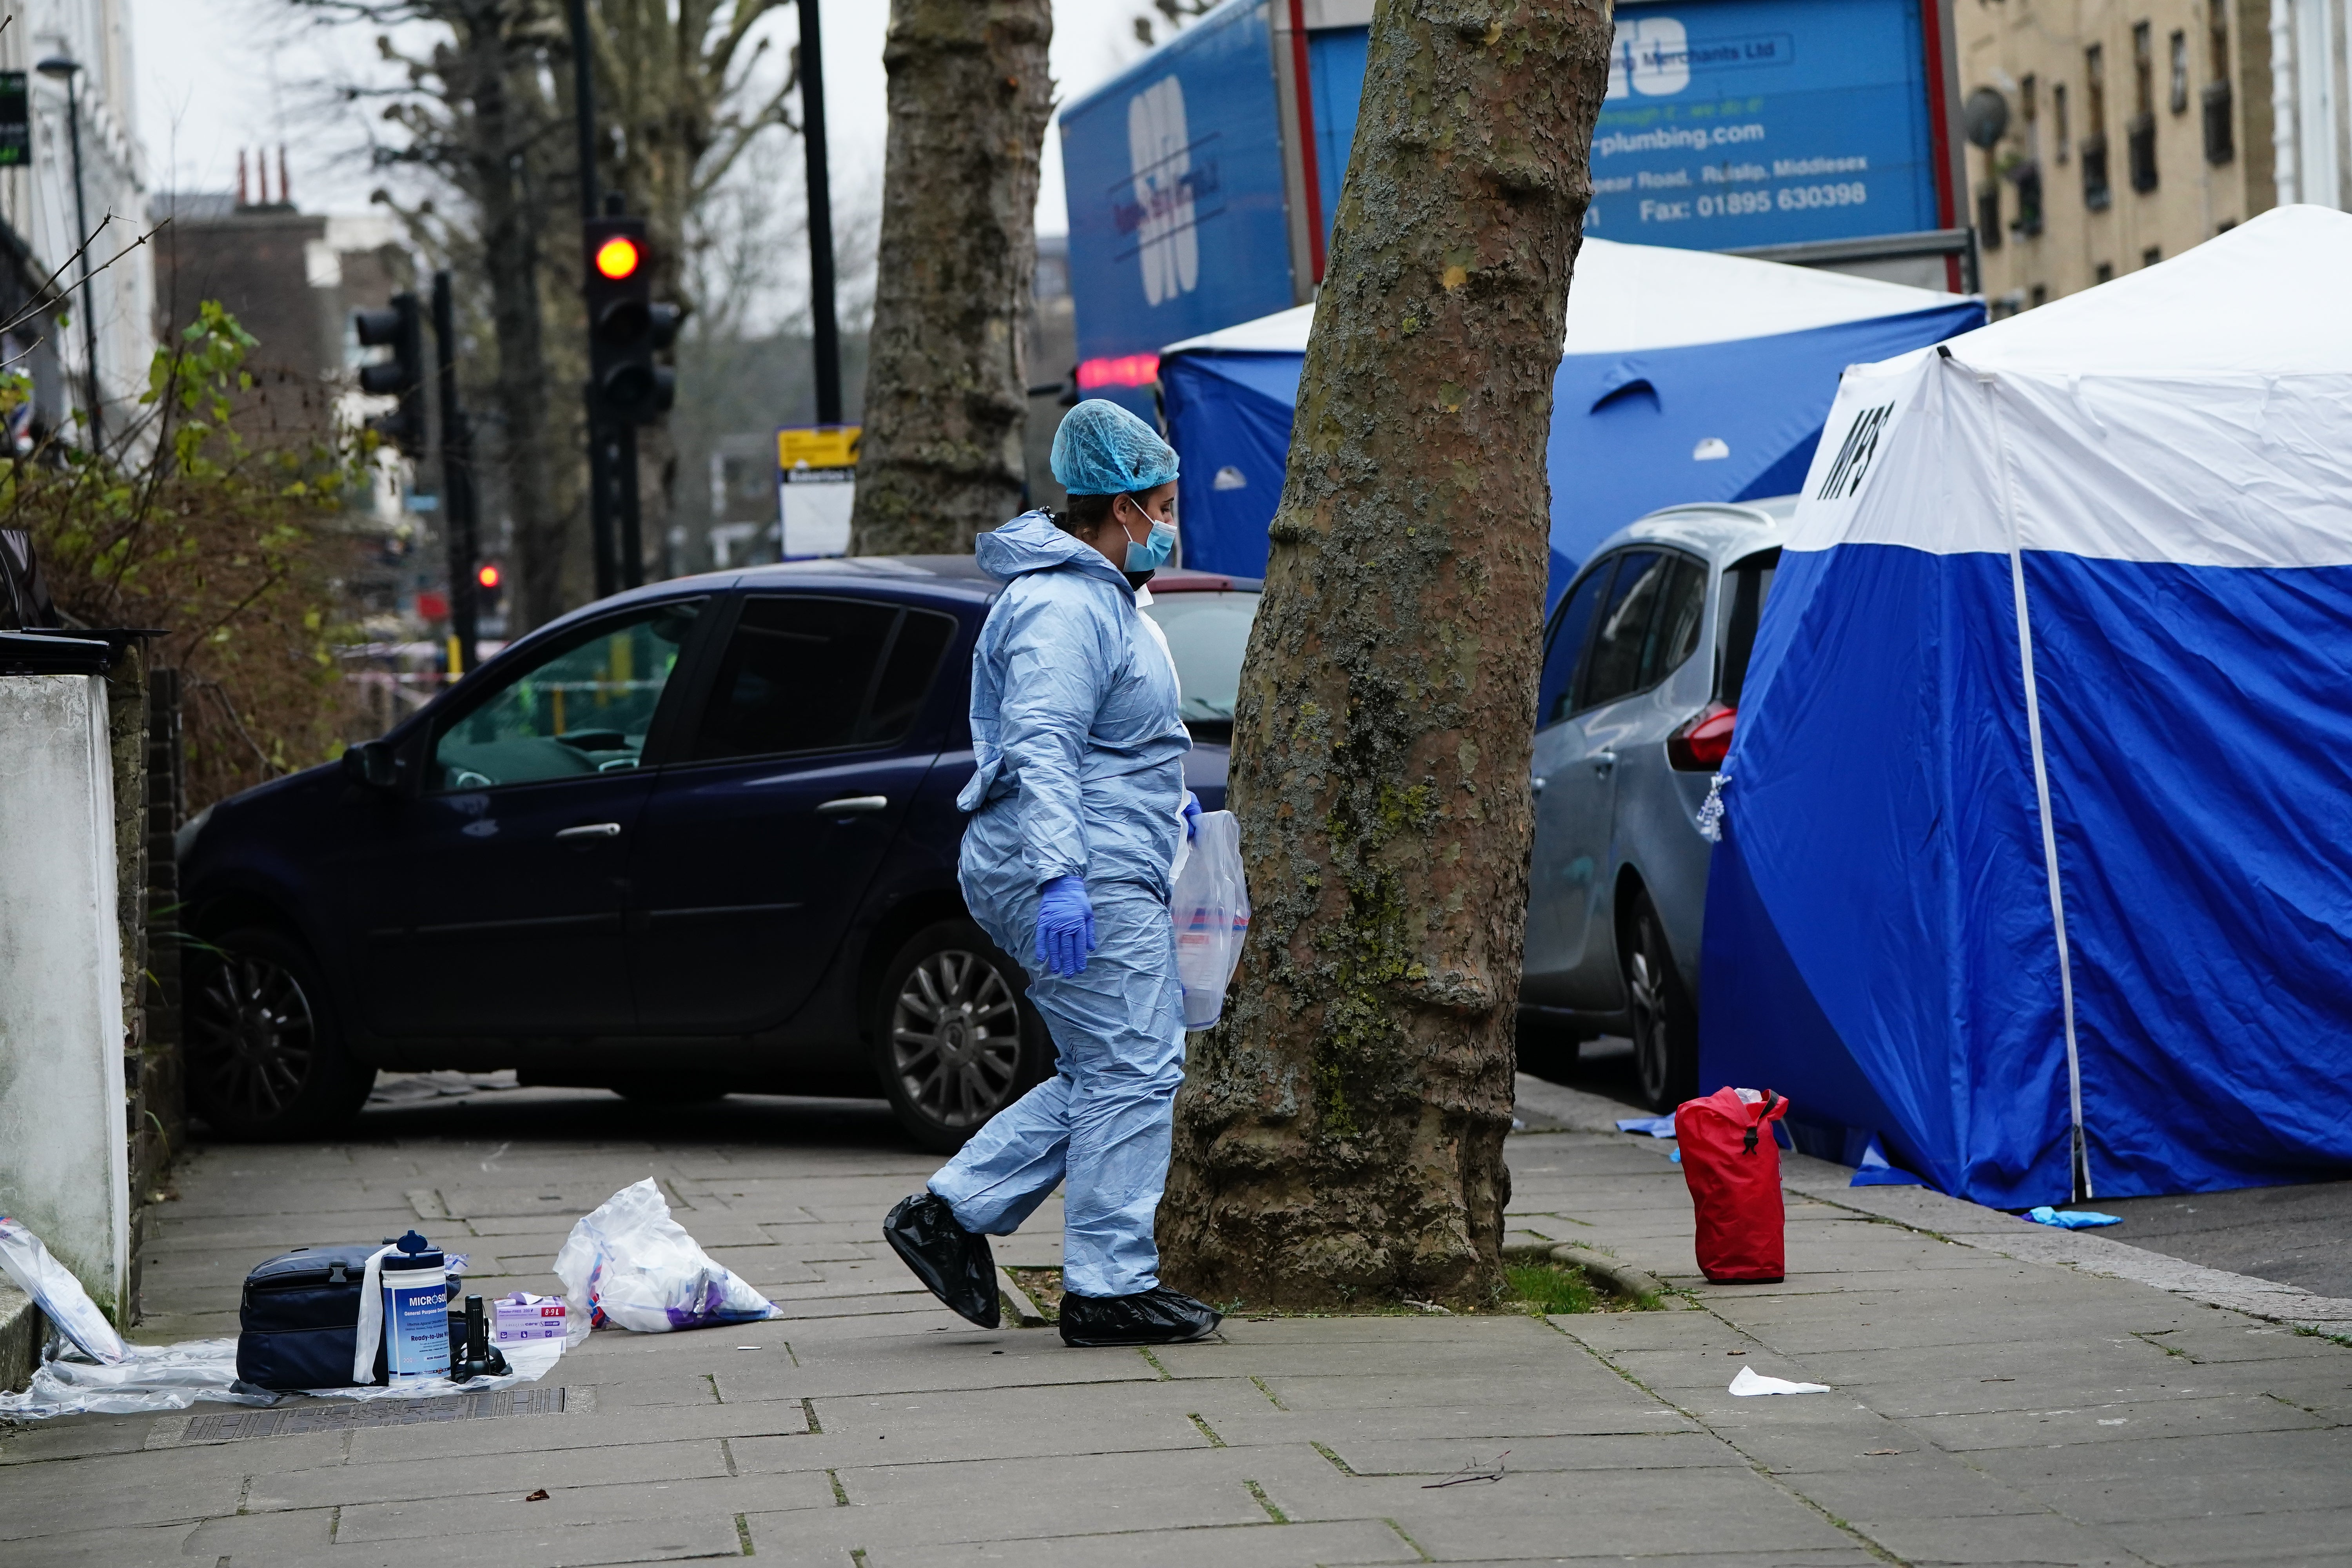 Police working at the scene of the deaths in Maida Vale, west London on Monday (Aaron Chown/PA)